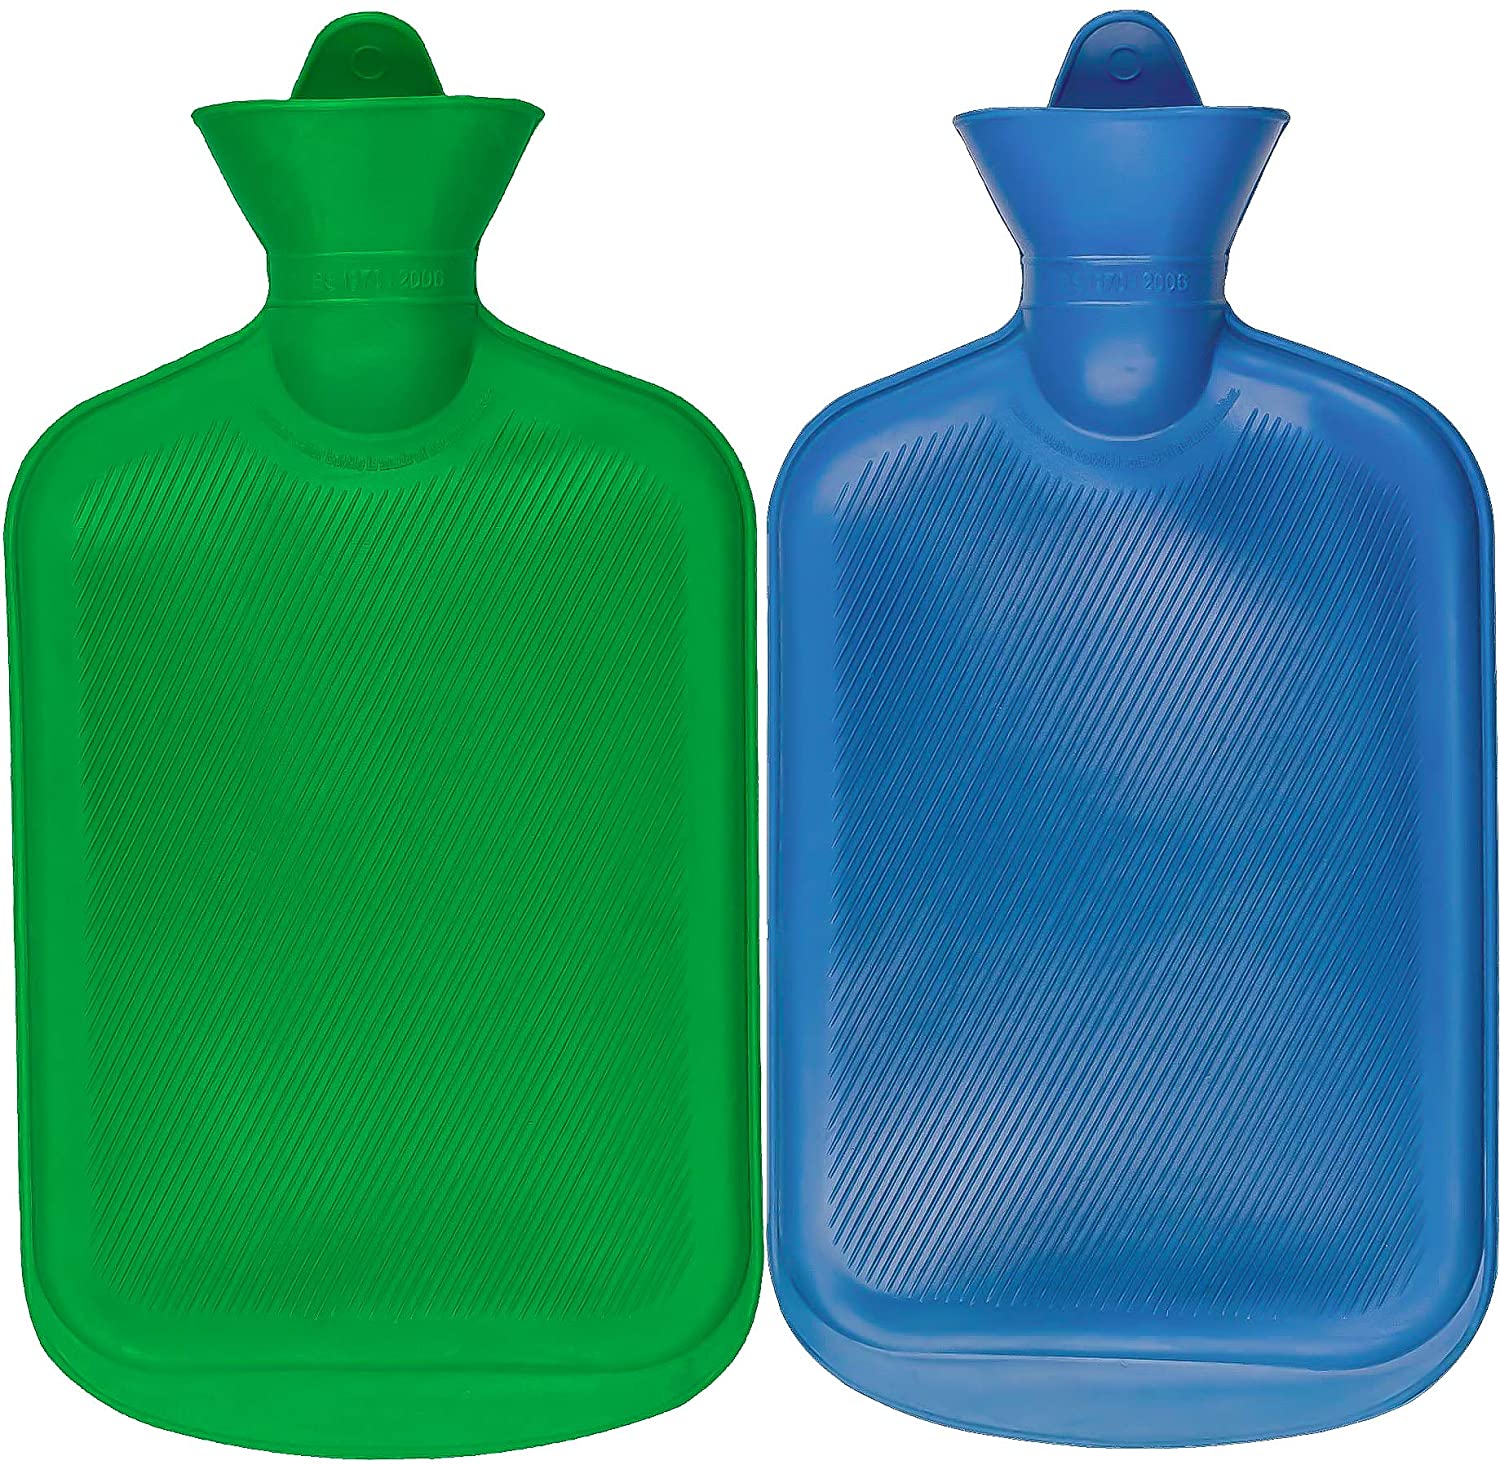 Durable Rubber Hot Water Bag for Hot Compress and Heat Therapy